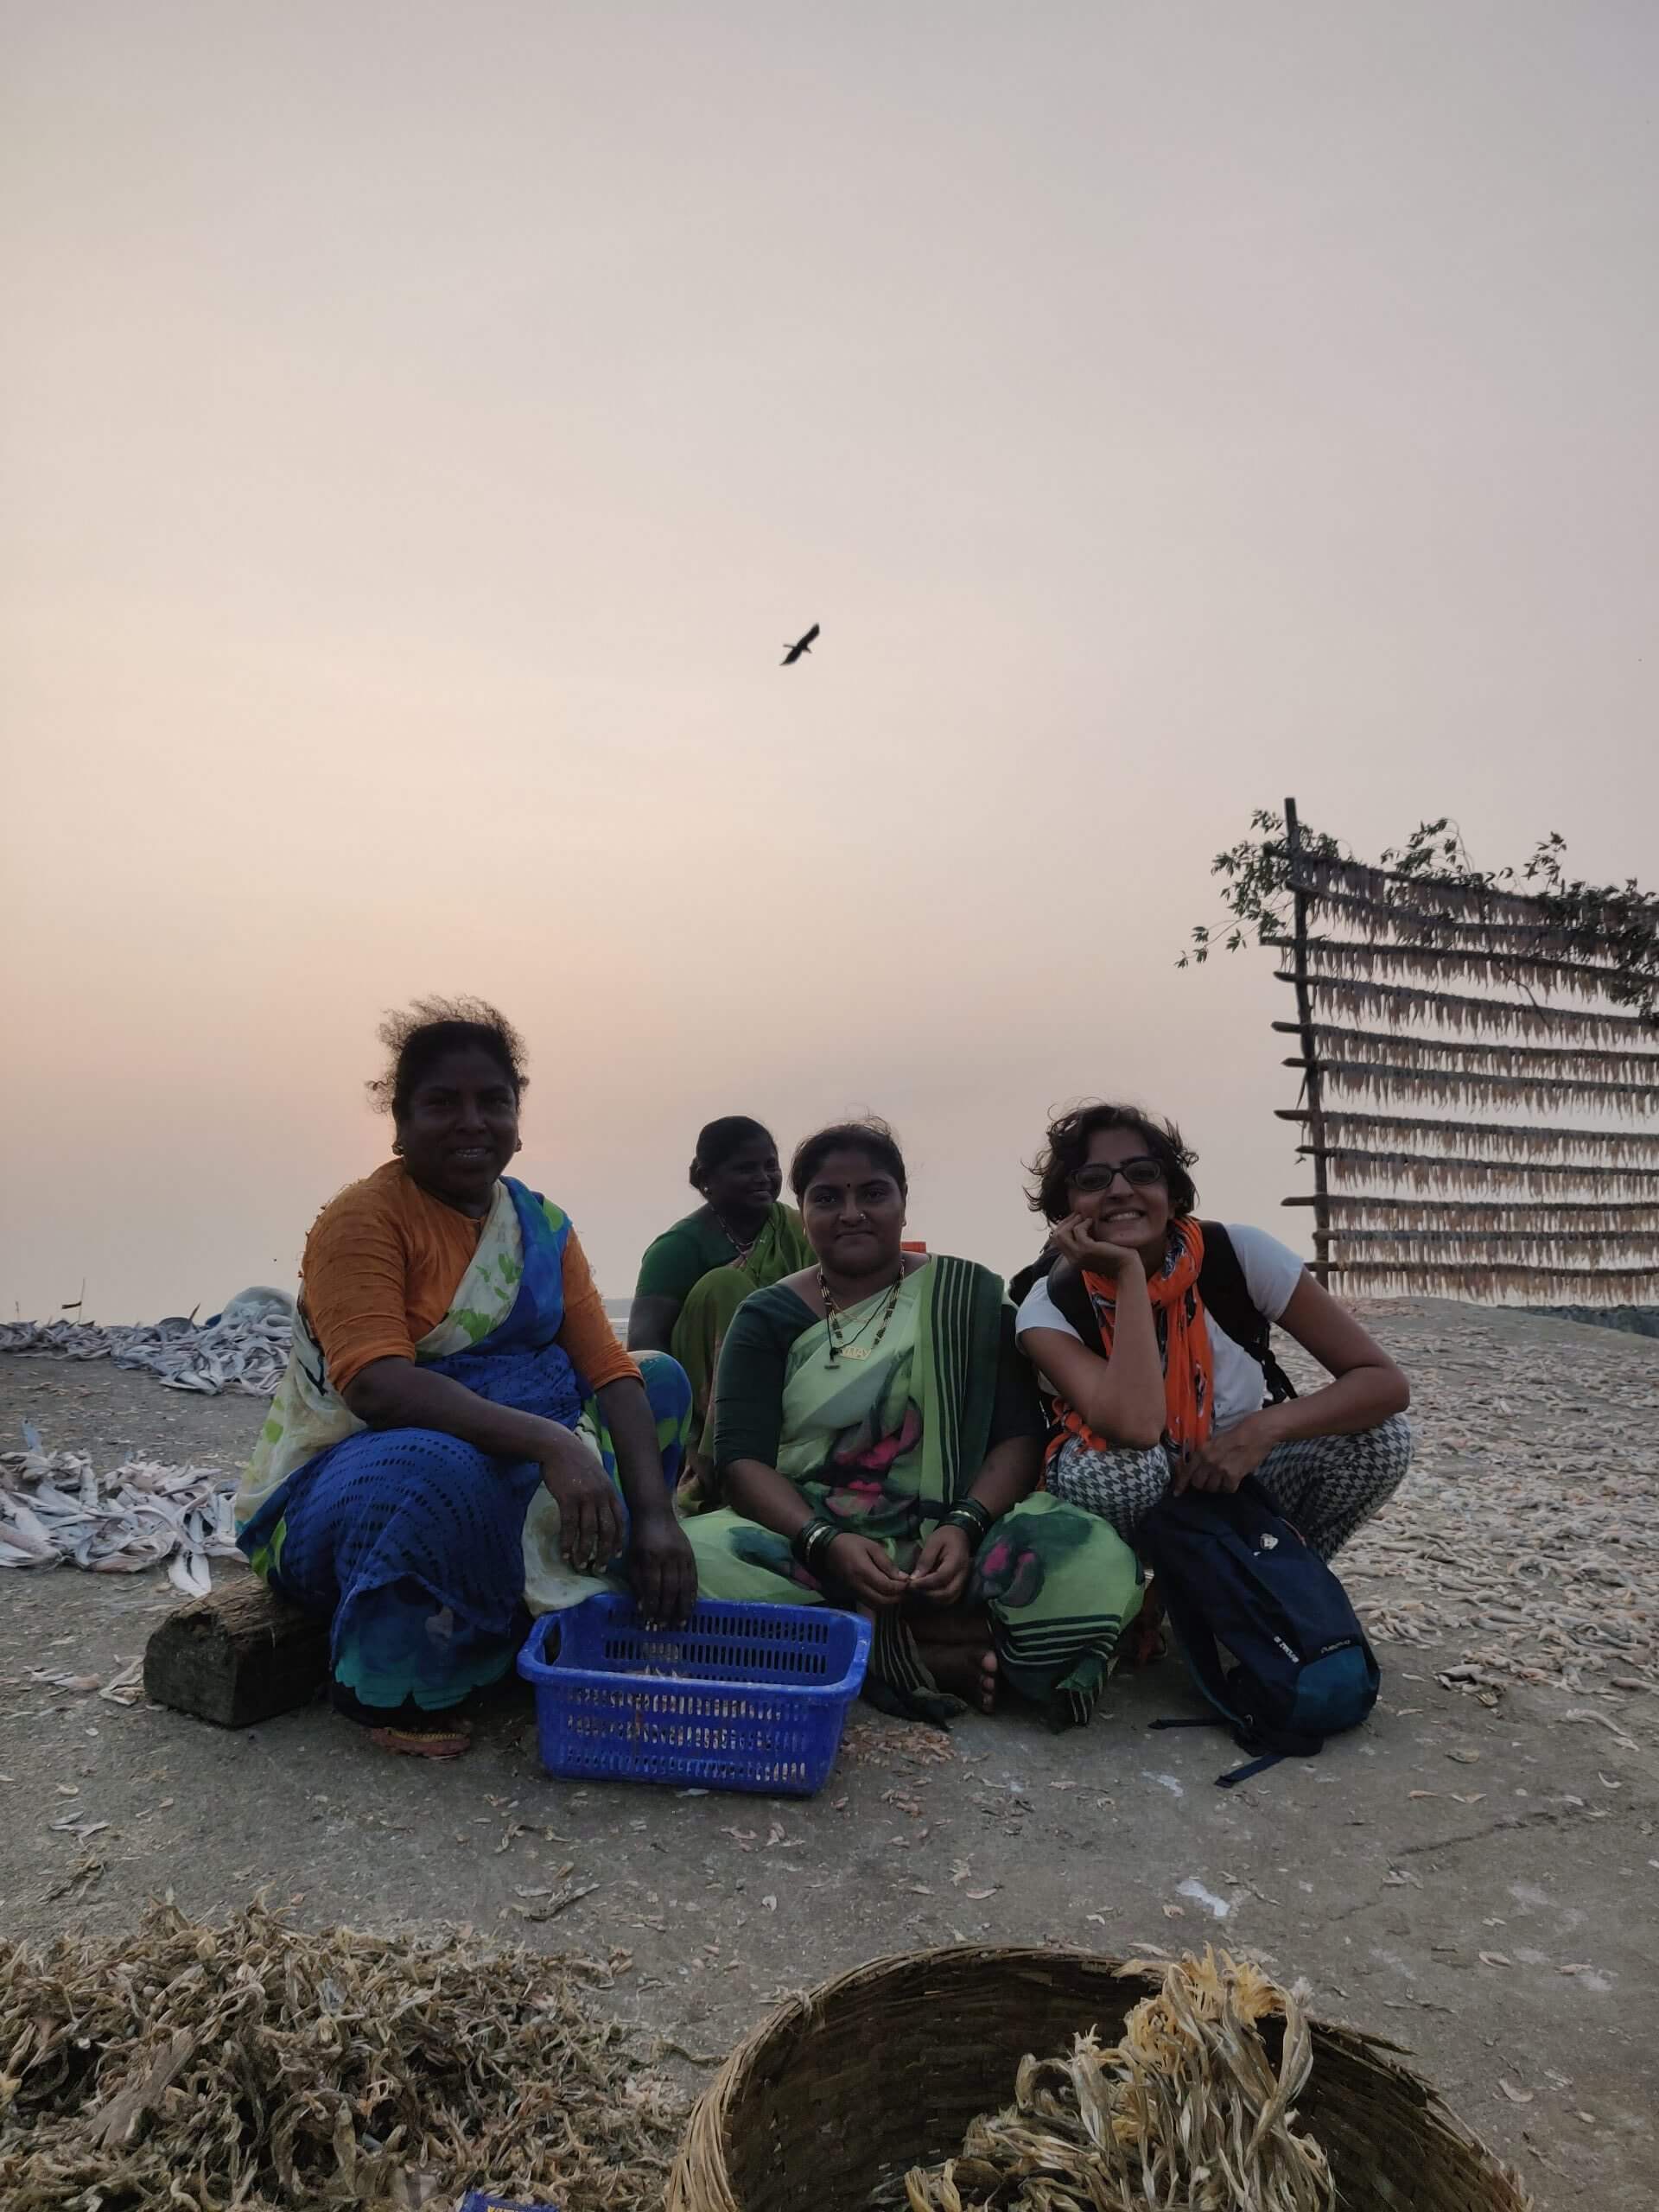 Production shot of Against the Tide. Three women sitting on the sand with baskets and with Director Sarvnik Kaur smiling.